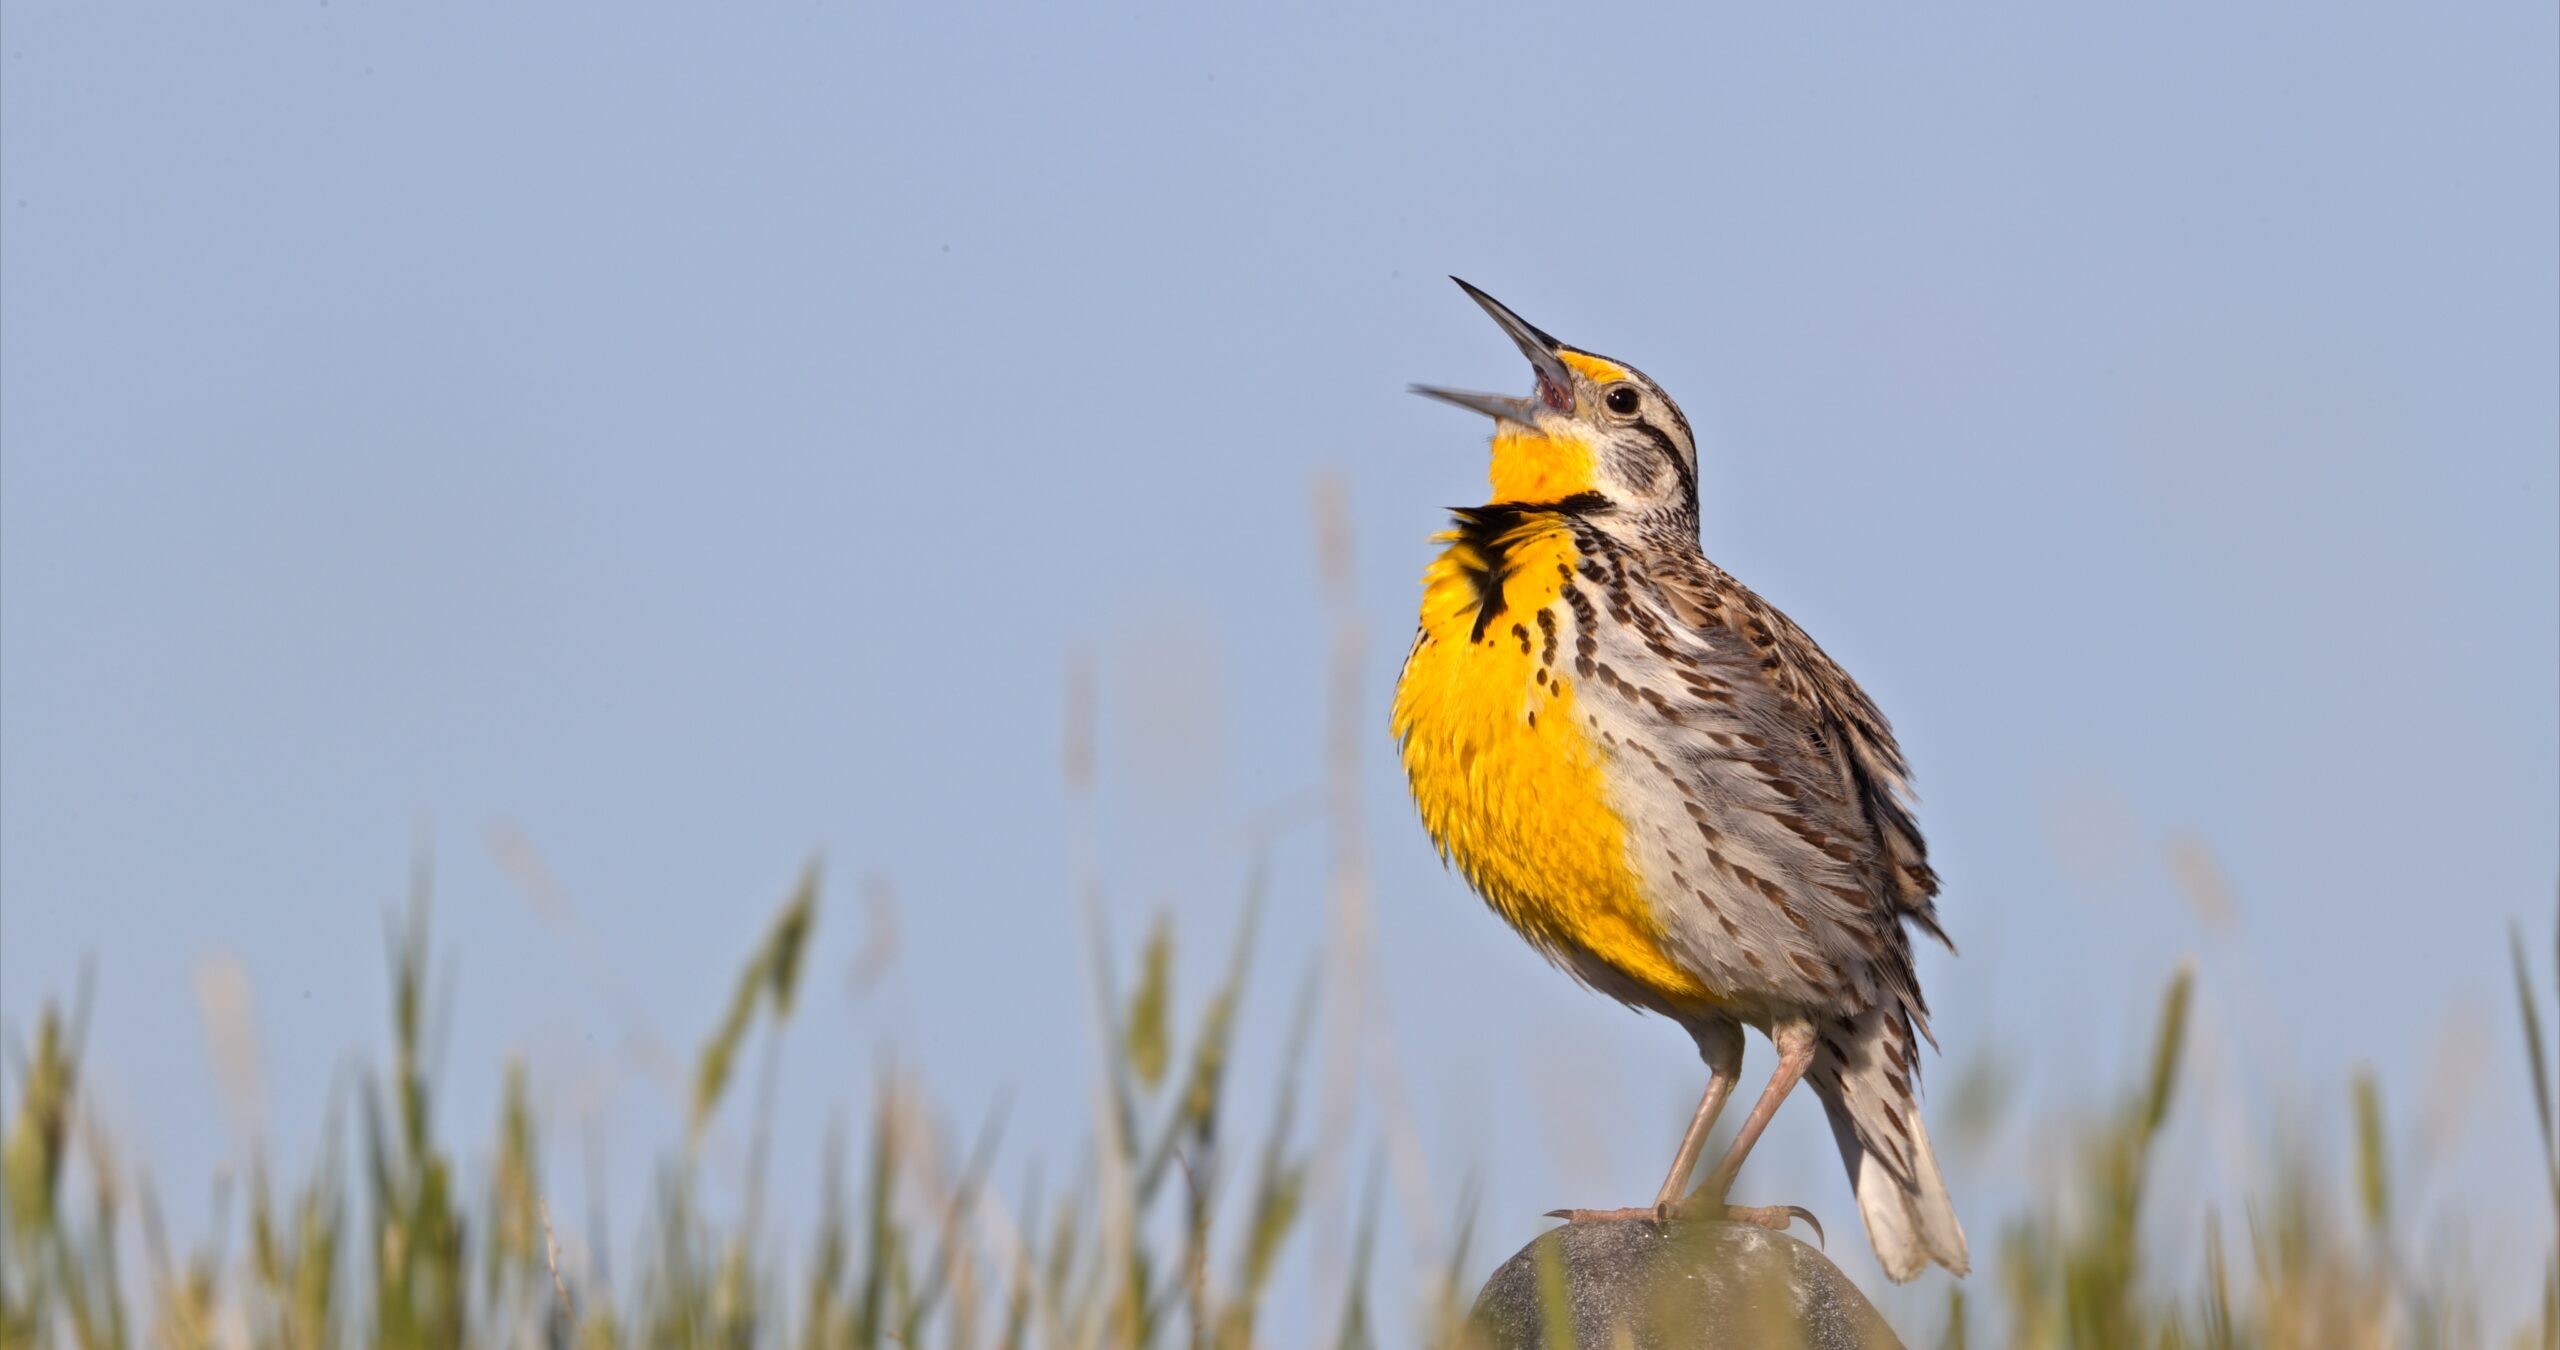 A Western Meadowlark sings while perched on a rock